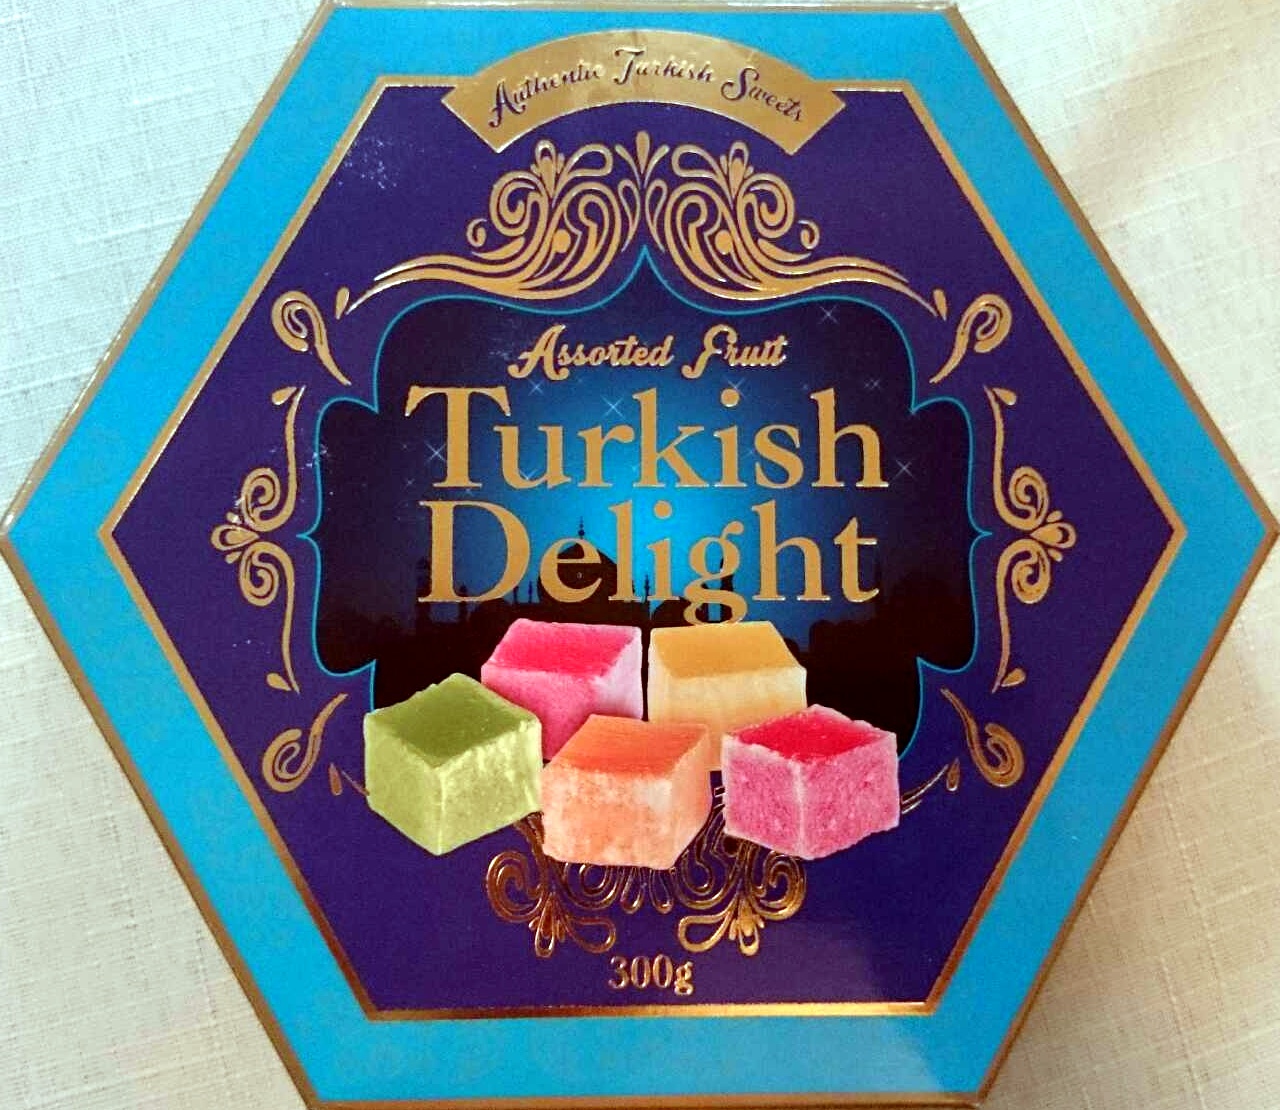 Assorted Fruit Turkish Delight - Product